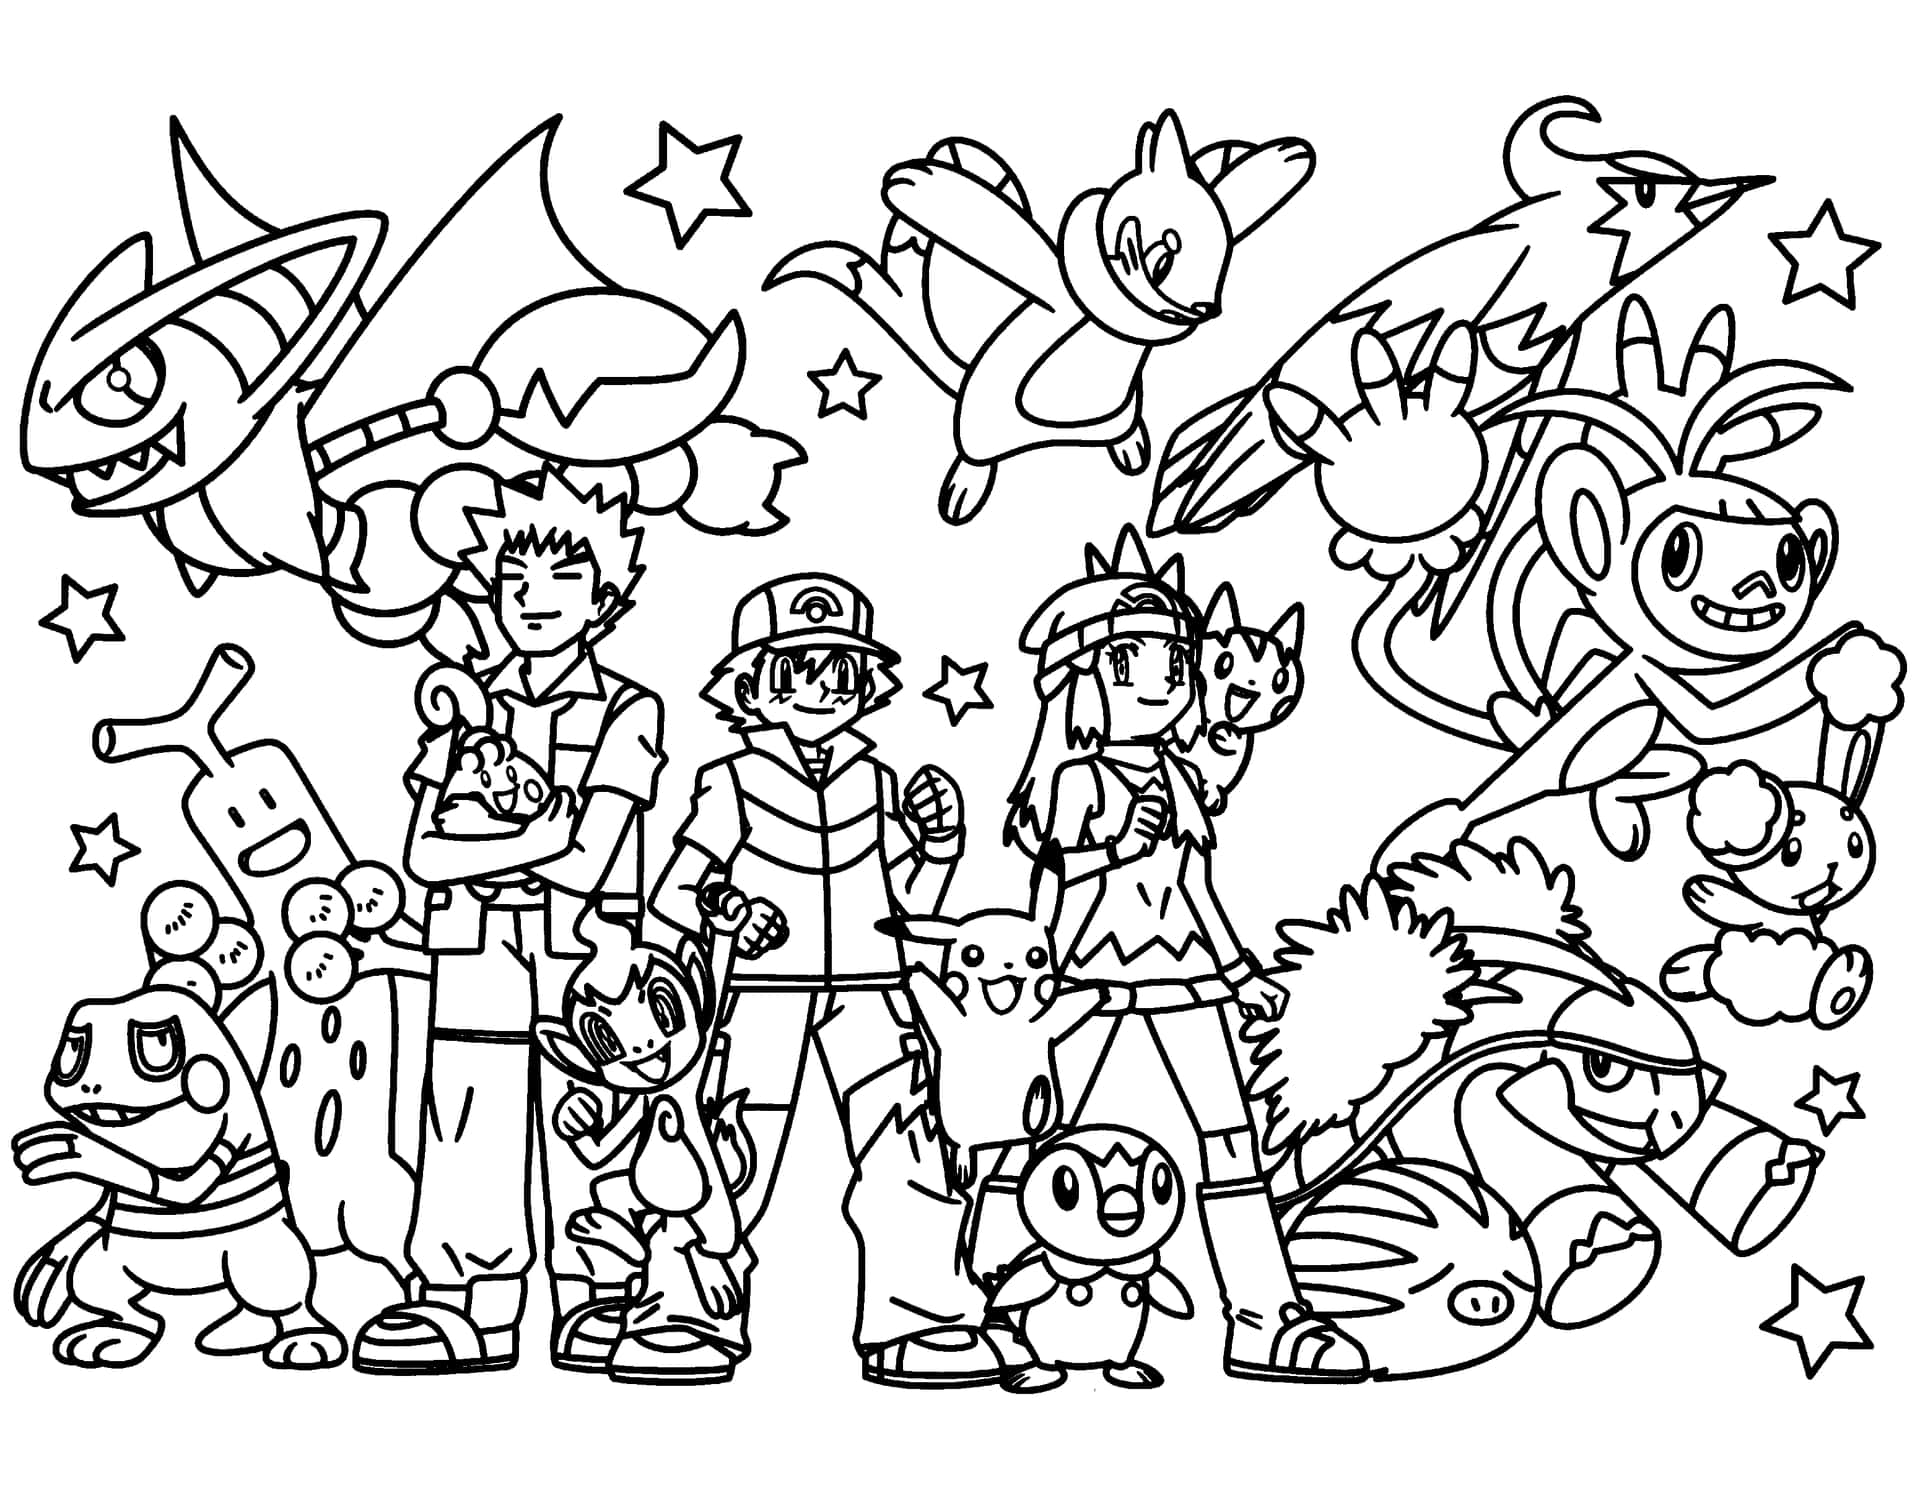 Pokemon Coloring Pages Ash and Friends Colouring book fun for kids